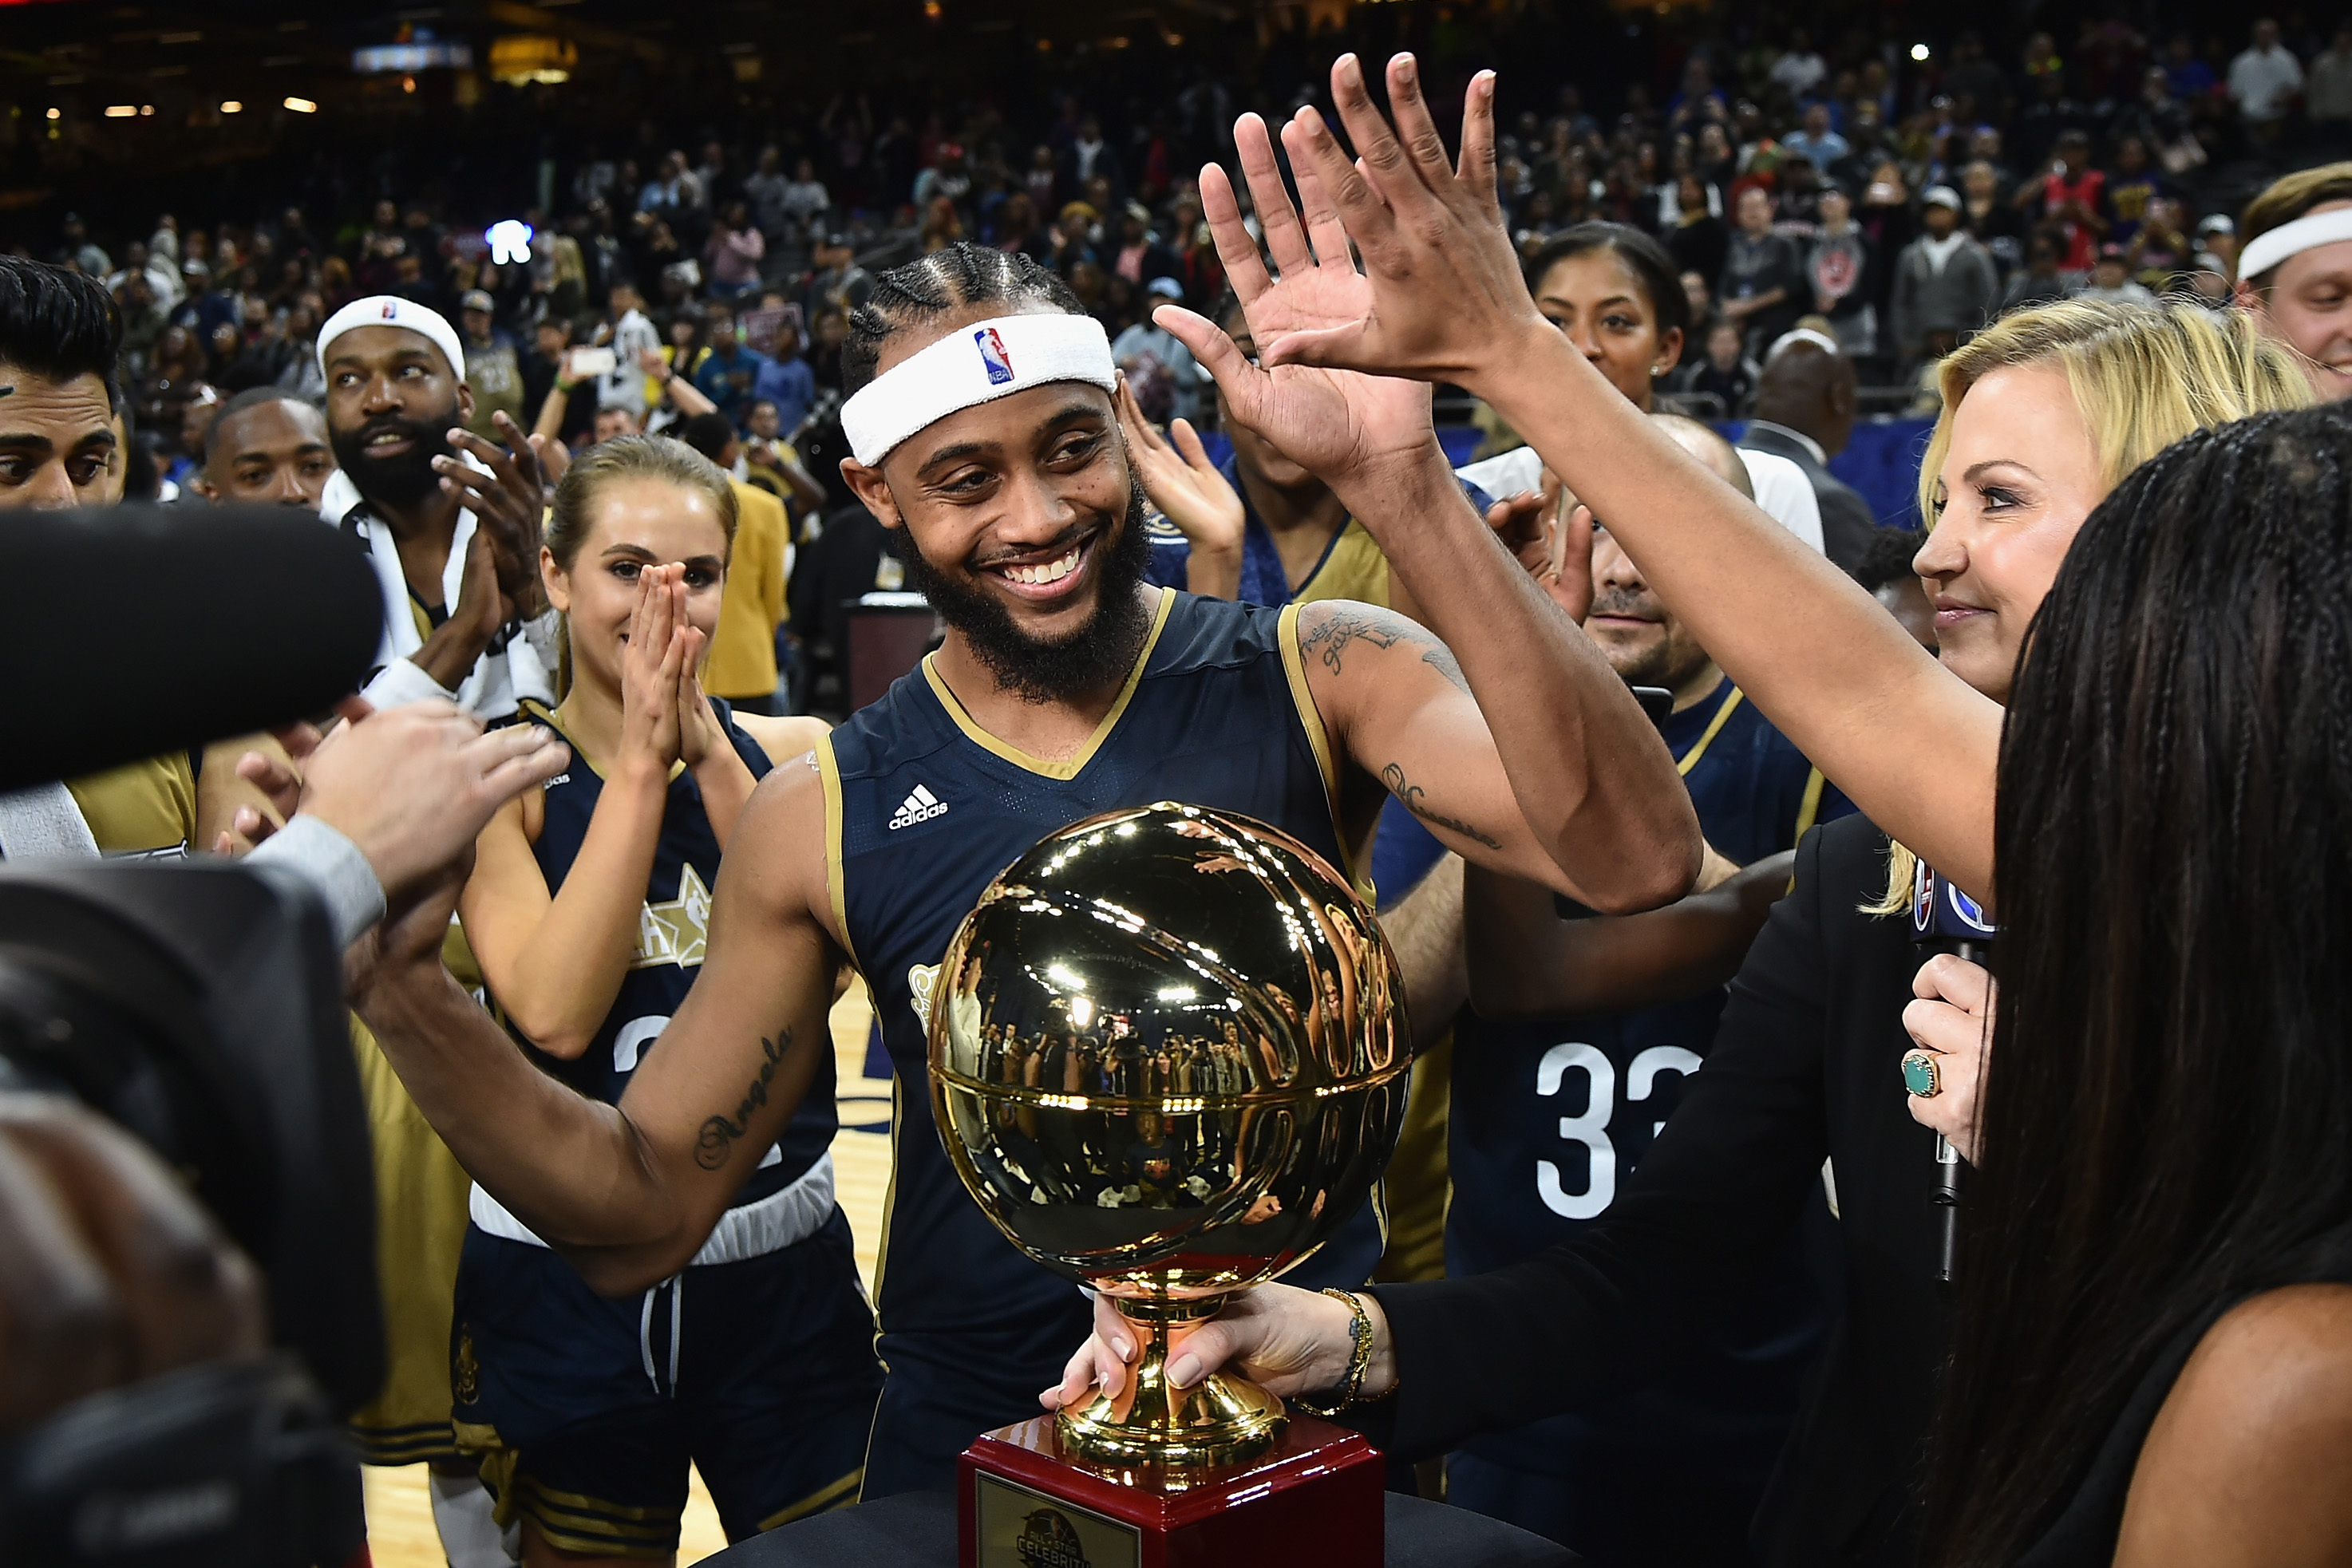 NBA All Star Celebrity Game 2020: Highlights Of The Star-Studded